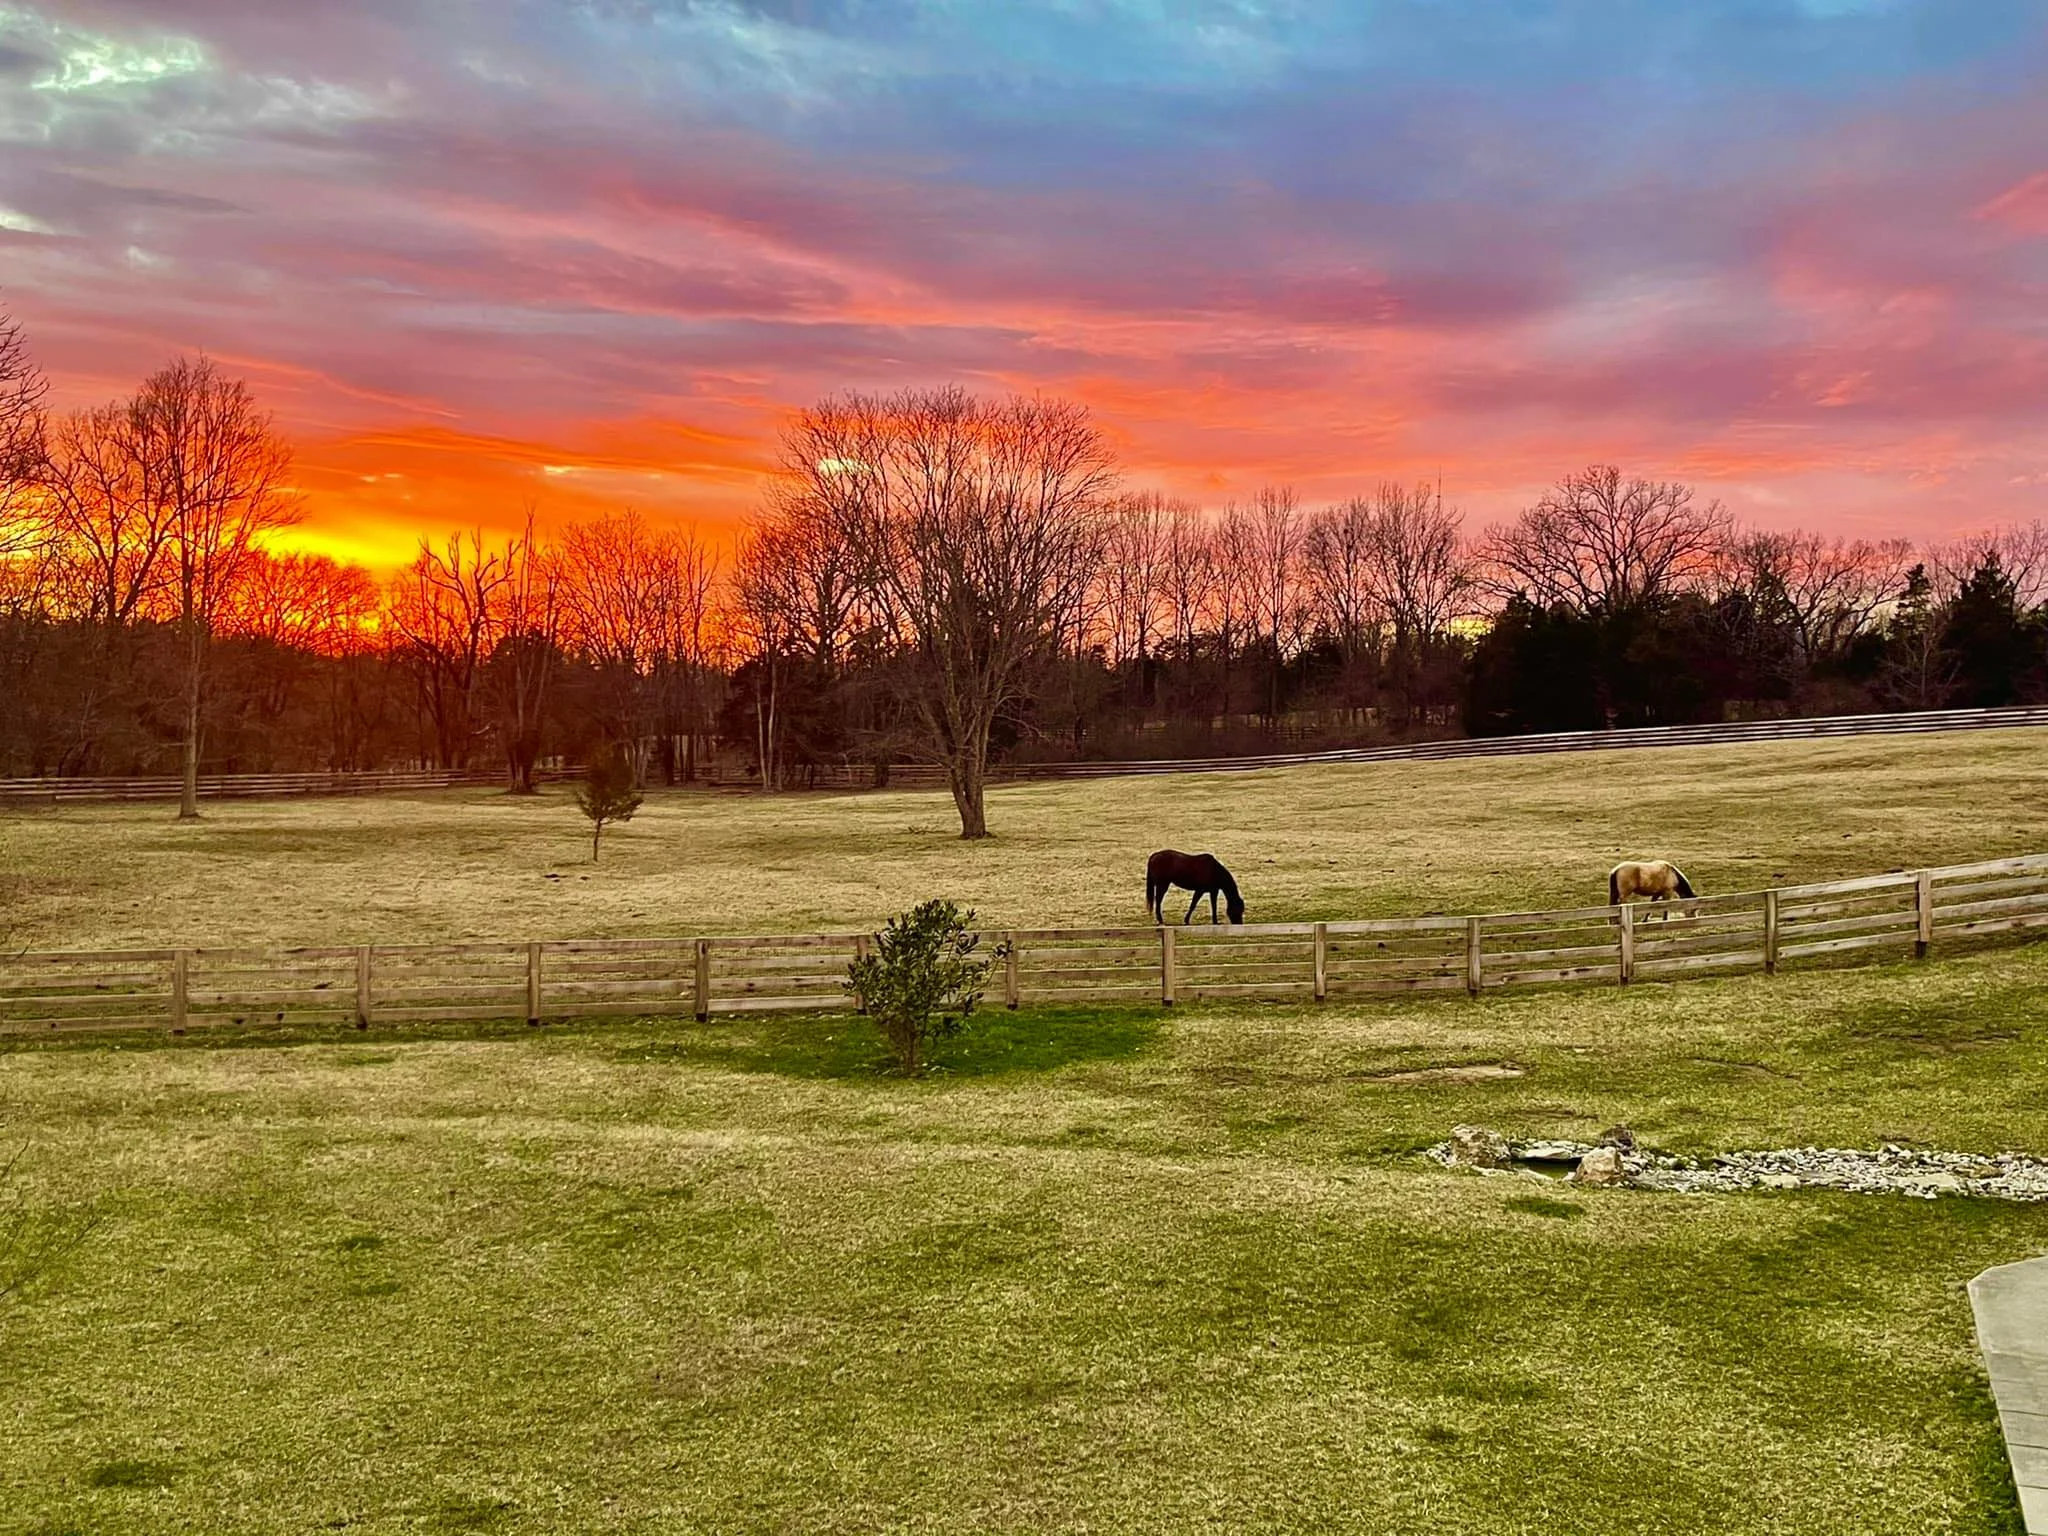 Sunset over the rear horse paddock